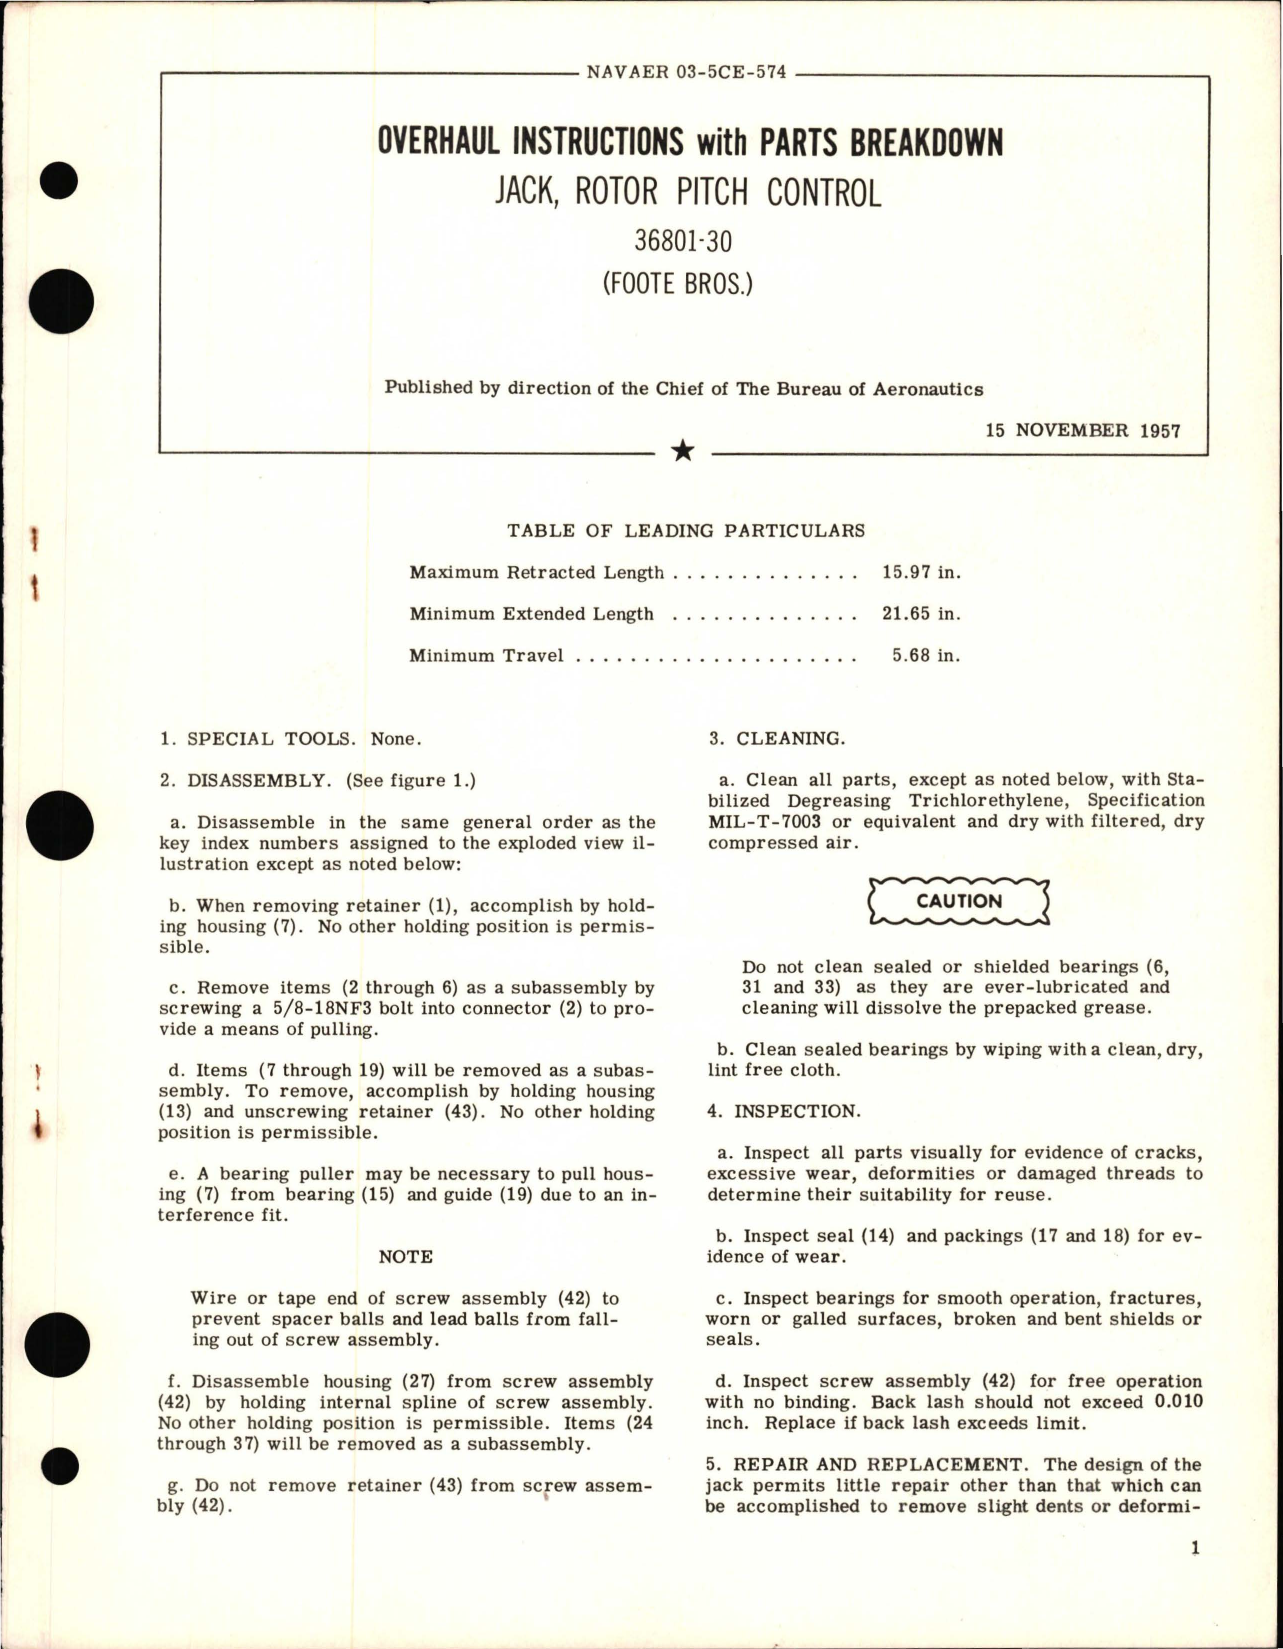 Sample page 1 from AirCorps Library document: Overhaul Instructions with Parts Breakdown for Jack, Rotor Pitch Control - 36801-30